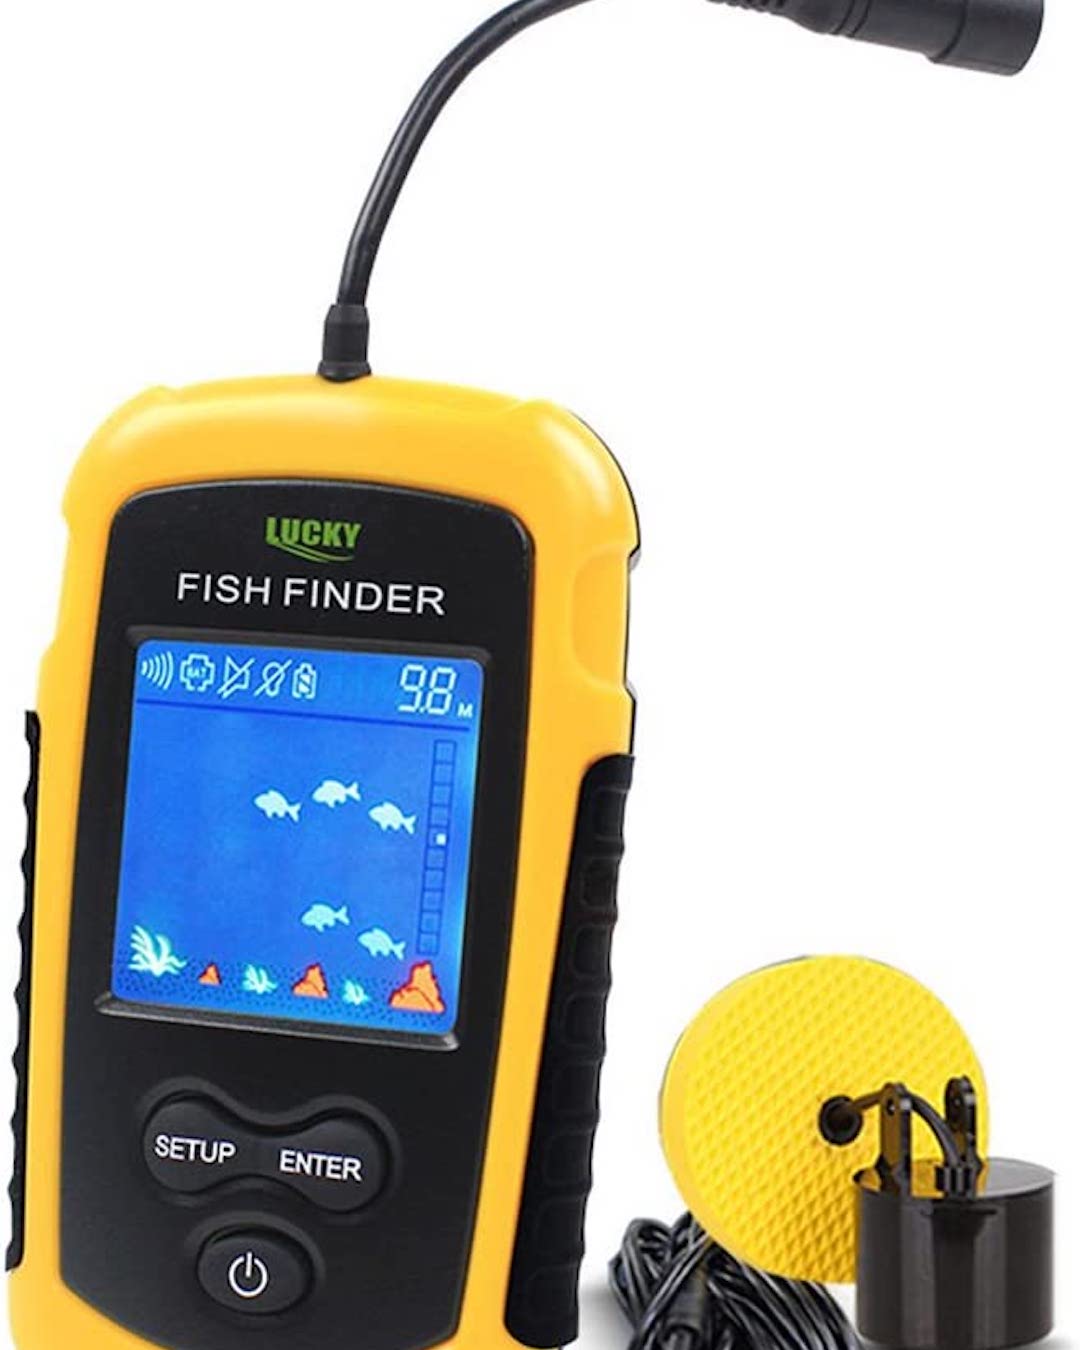 A portable fishing SONAR Father's Day gift idea